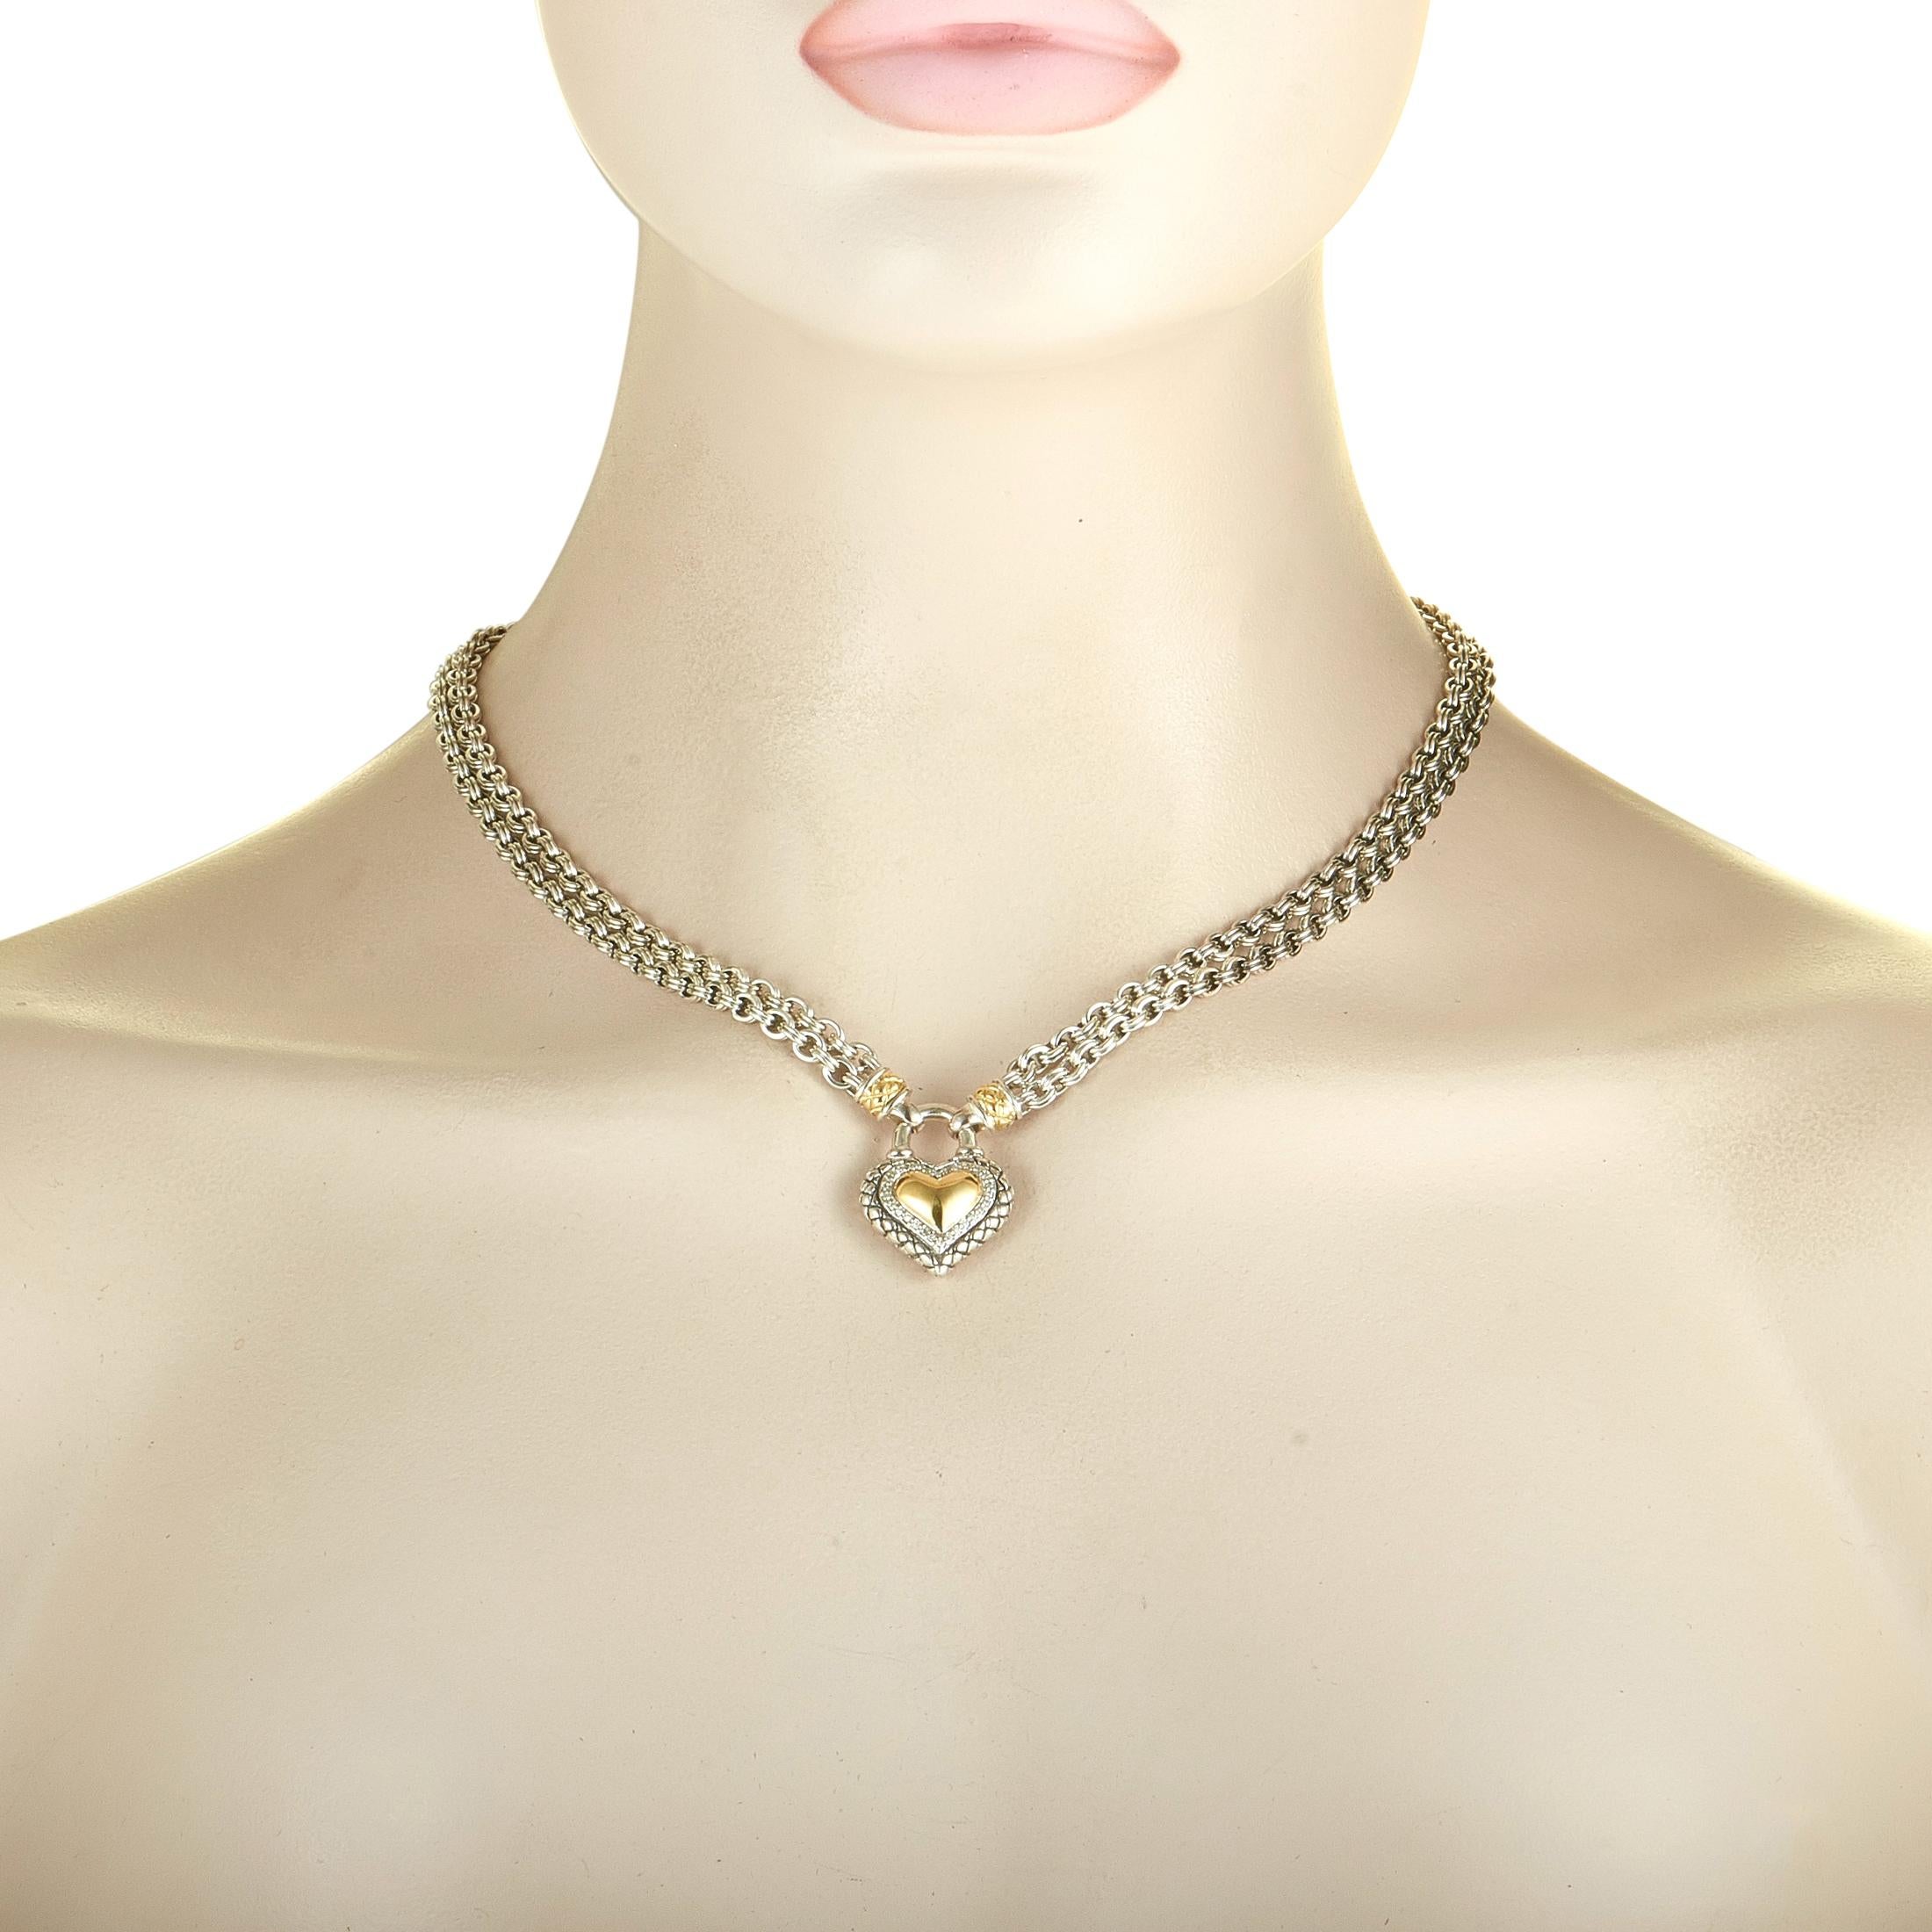 This Scott Kay necklace is made out of sterling silver and diamonds that amount to 0.15 carats. The necklace weighs 54.5 grams and measures 16” in length, boasting a 1” by 0.75” heart pendant.

Offered in brand new condition, this jewelry piece